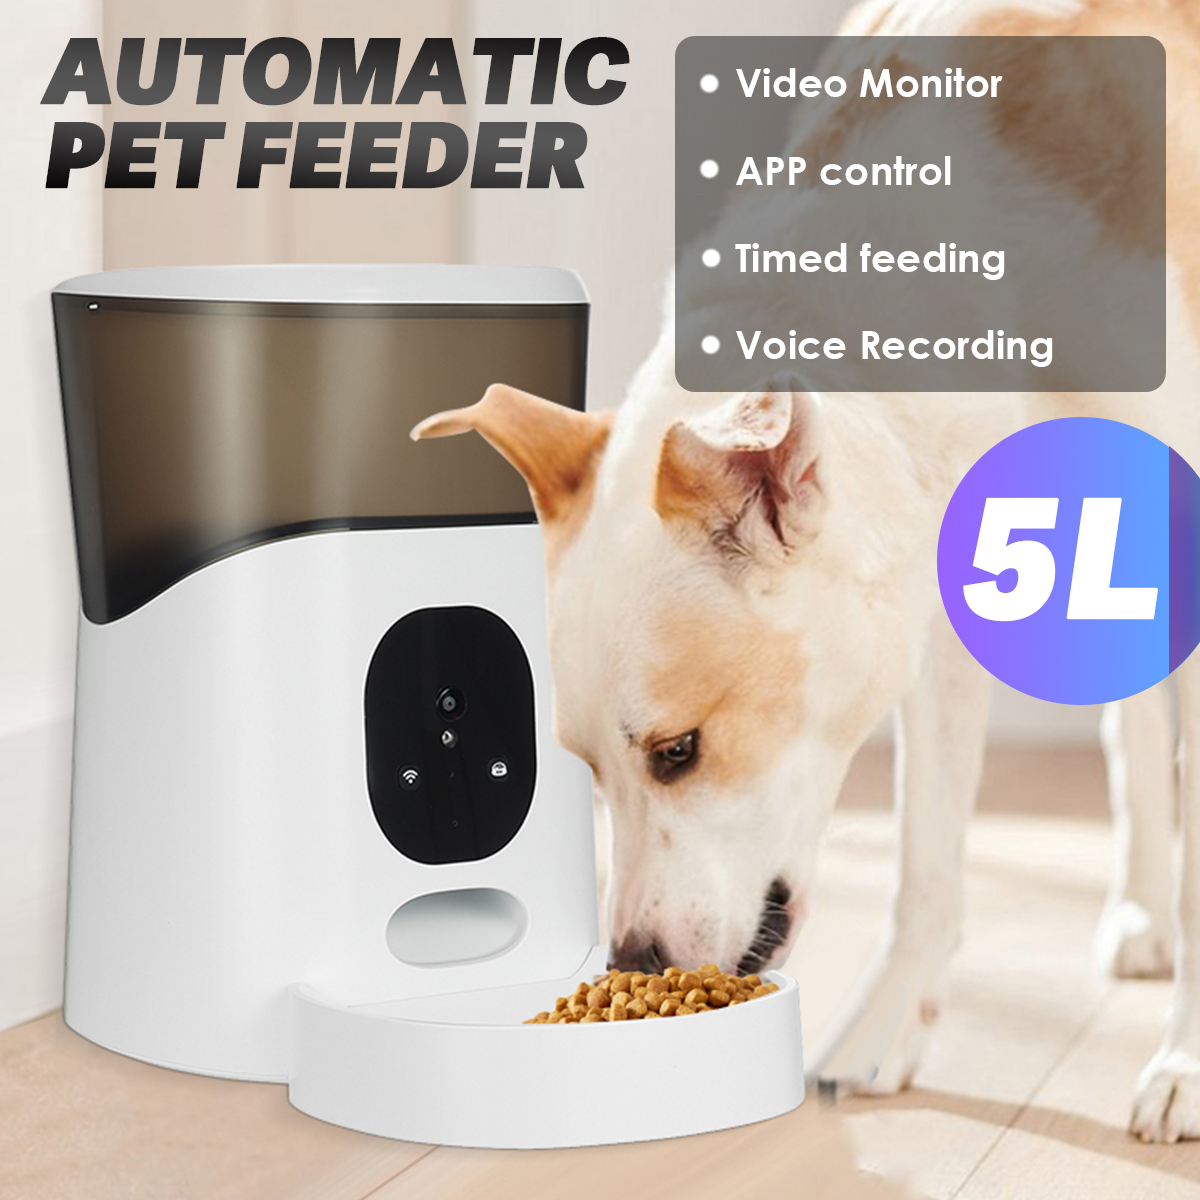 5L-Automatic-Pet-Feeder-Timing-Recording-Voice-APP-control-Intelligent-Dog-Feeding-Cat-Bowls-Puppy-S-1957123-5